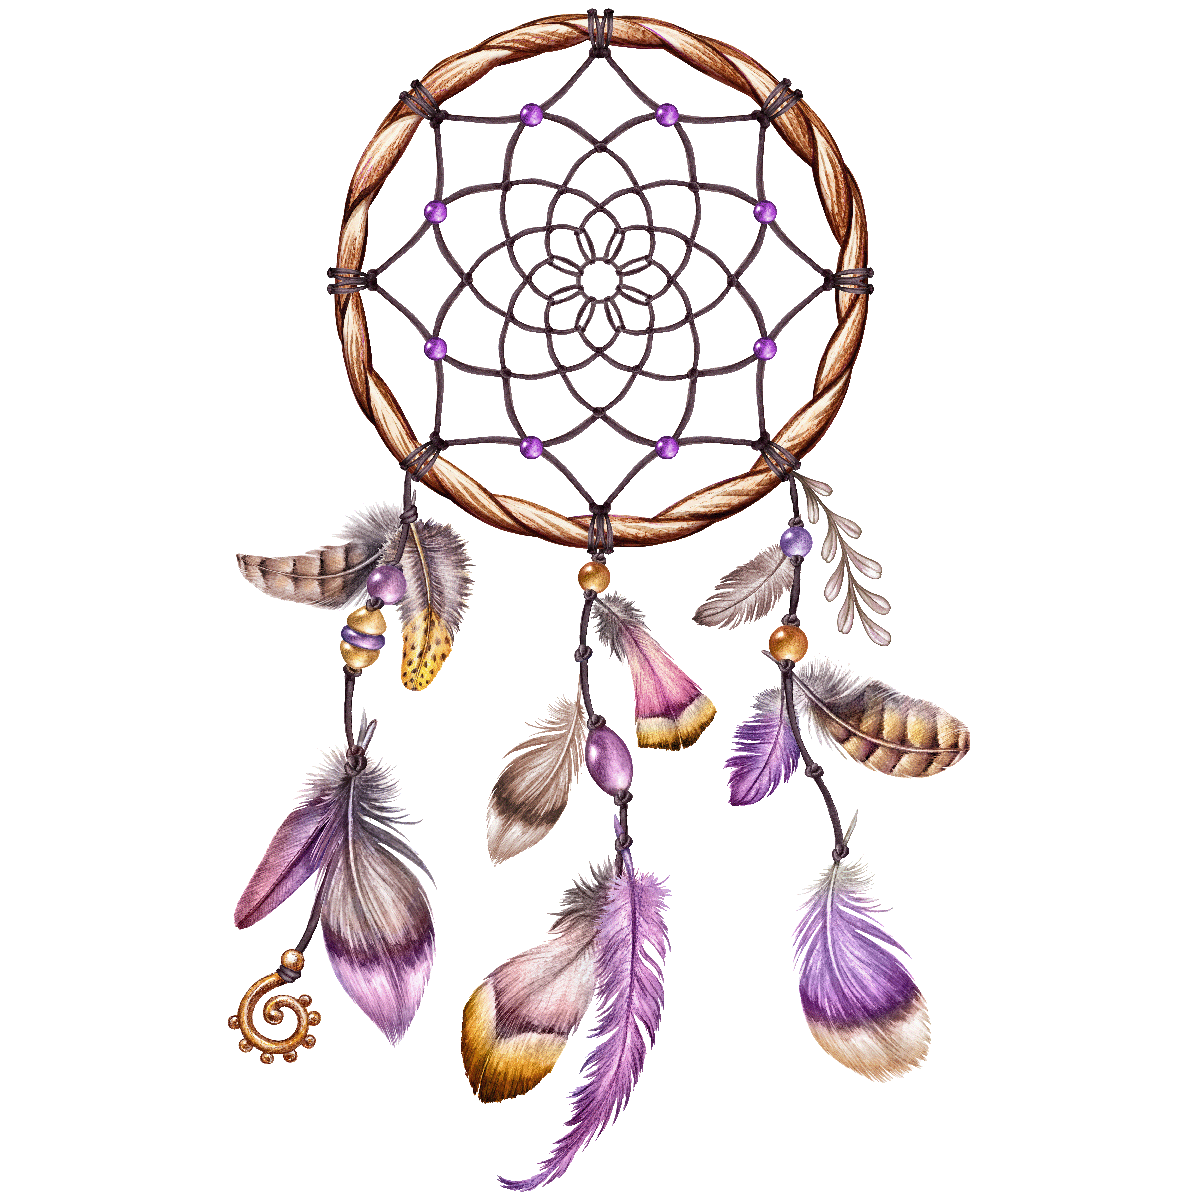 And Dreamcatcher Illustration Watercolor Frames Borders Painting PNG Image